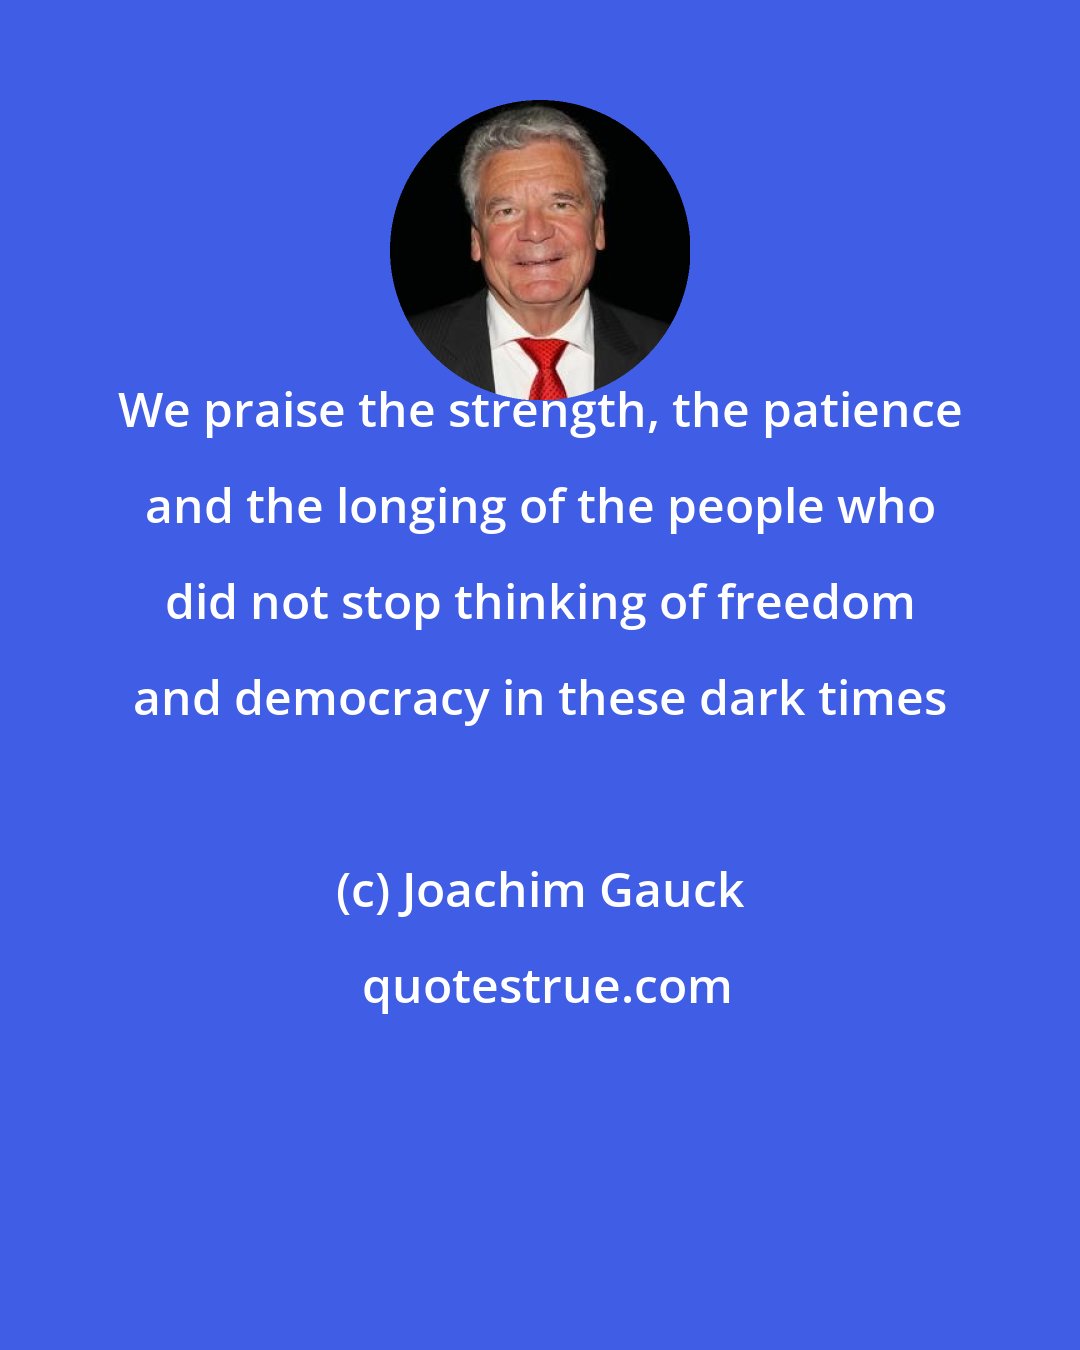 Joachim Gauck: We praise the strength, the patience and the longing of the people who did not stop thinking of freedom and democracy in these dark times